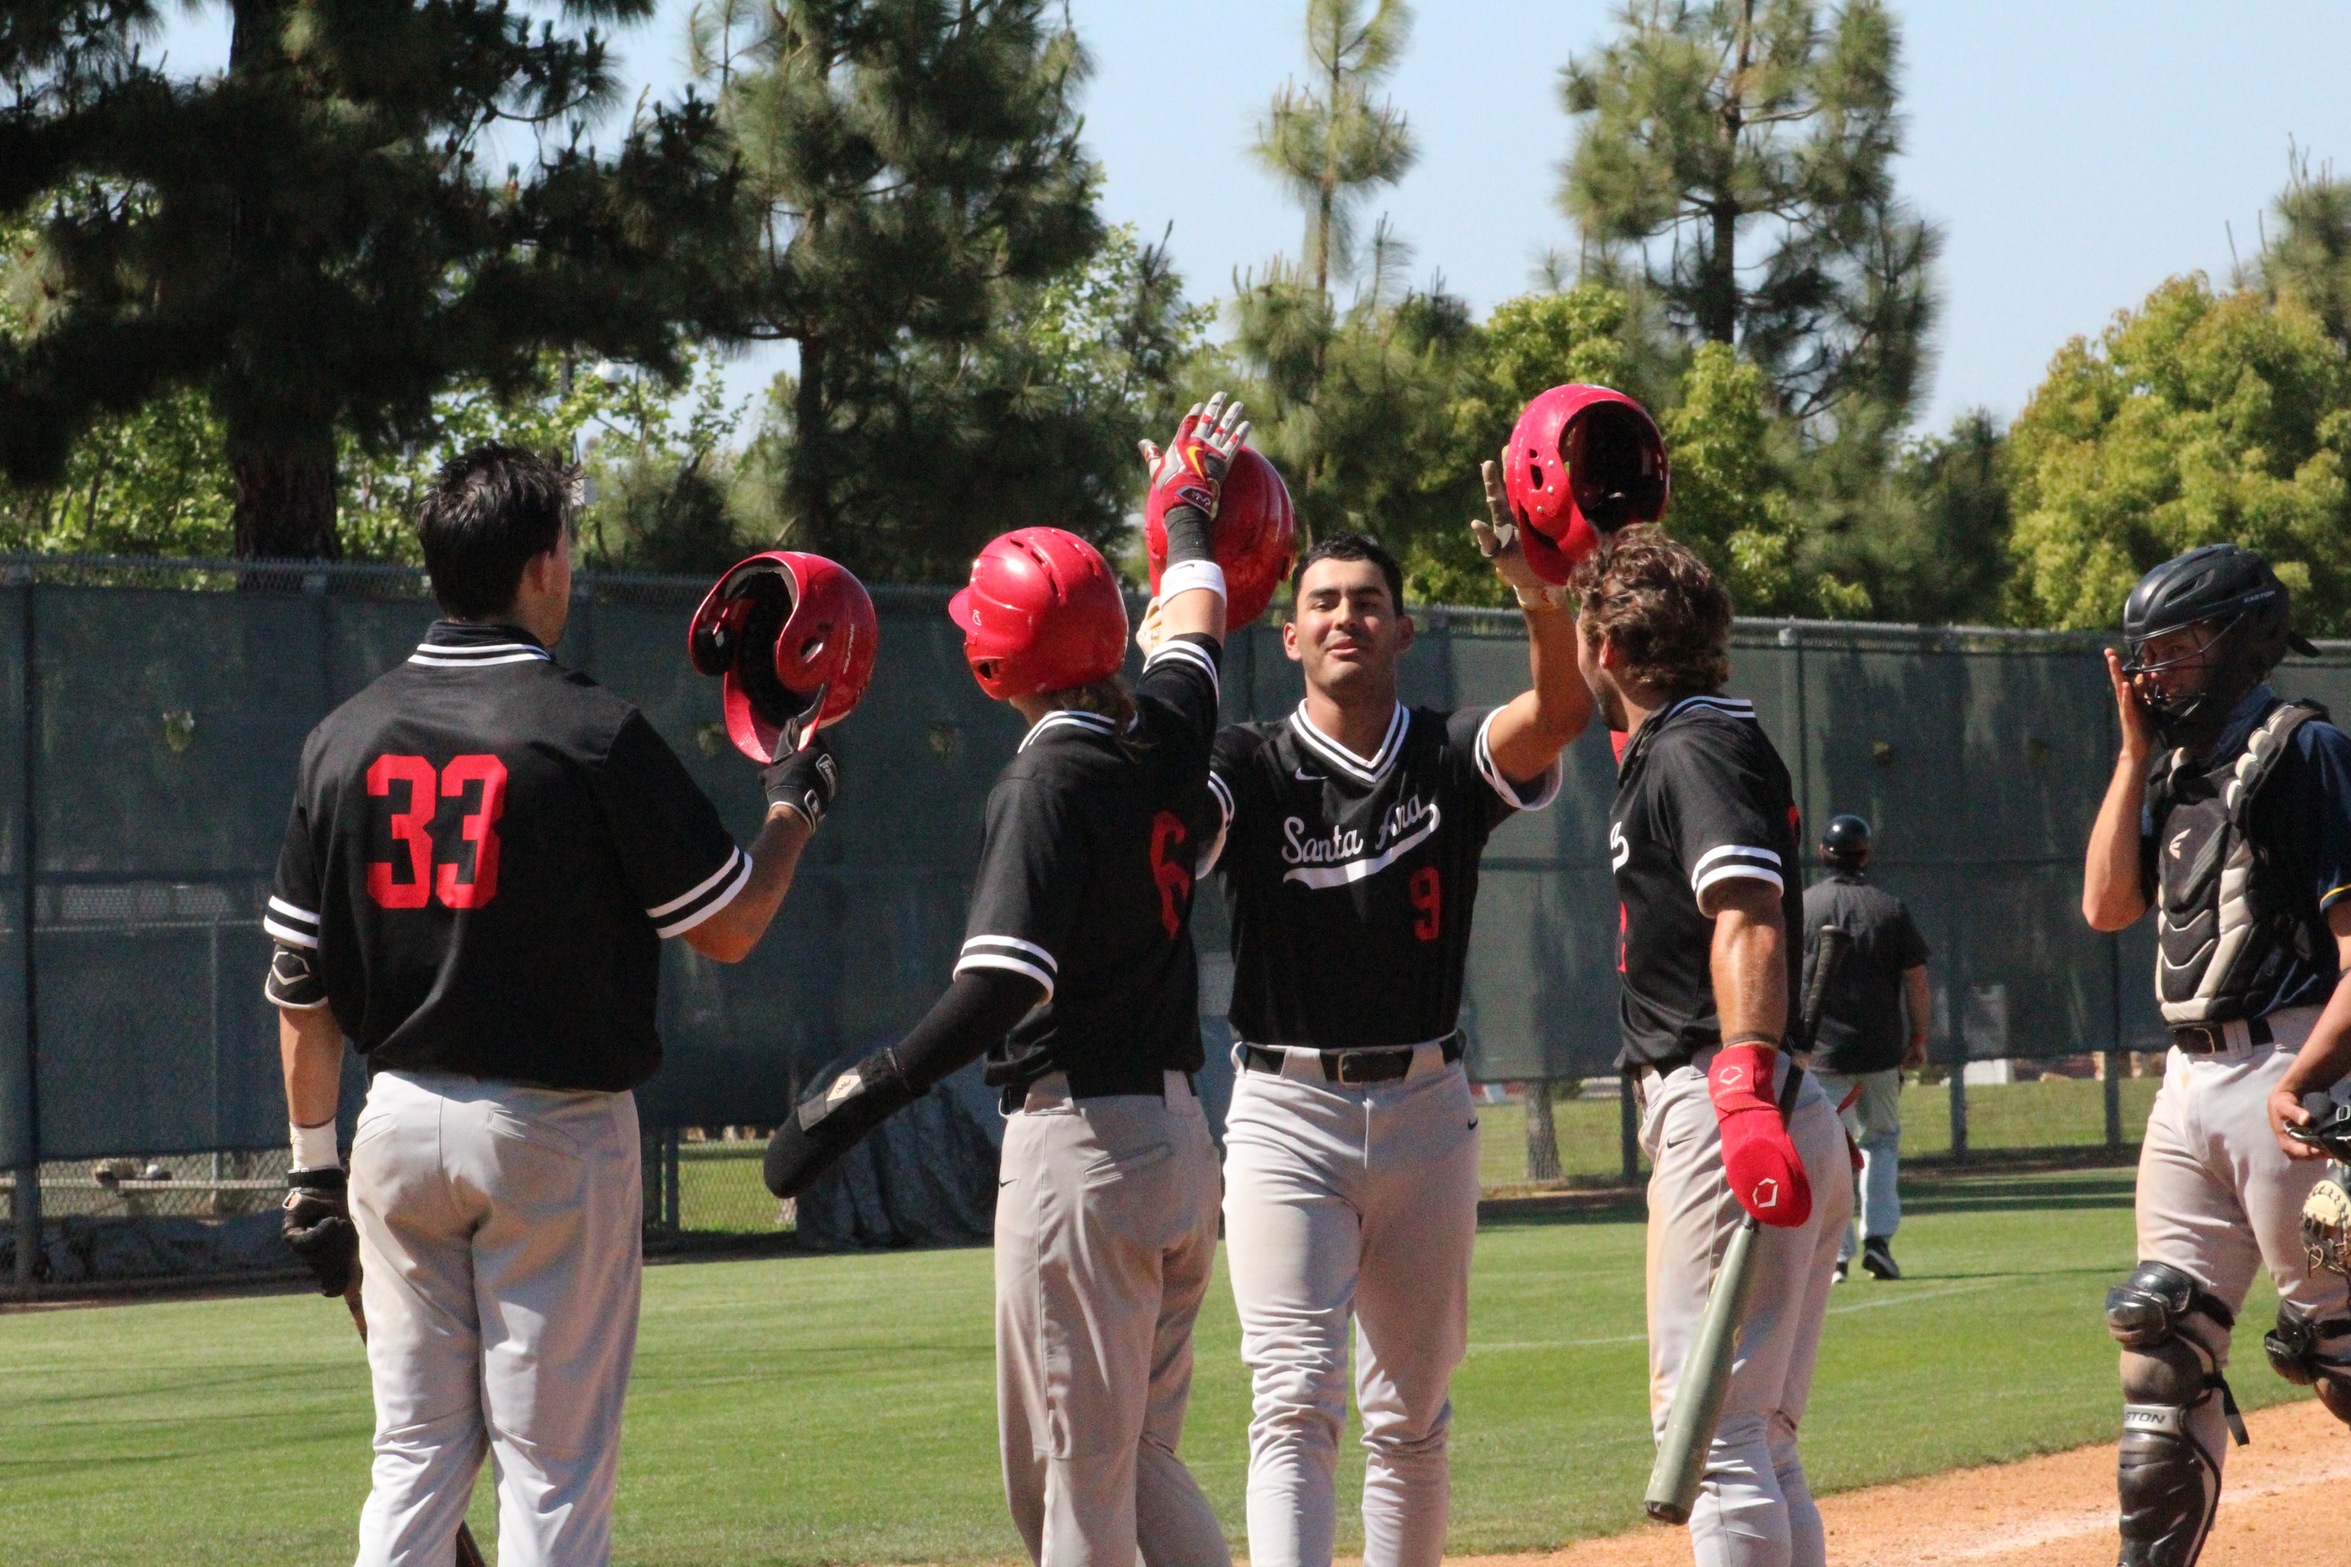 Santa Ana Stays Undefeated in OEC Play with 11-9 Win Over Cypress